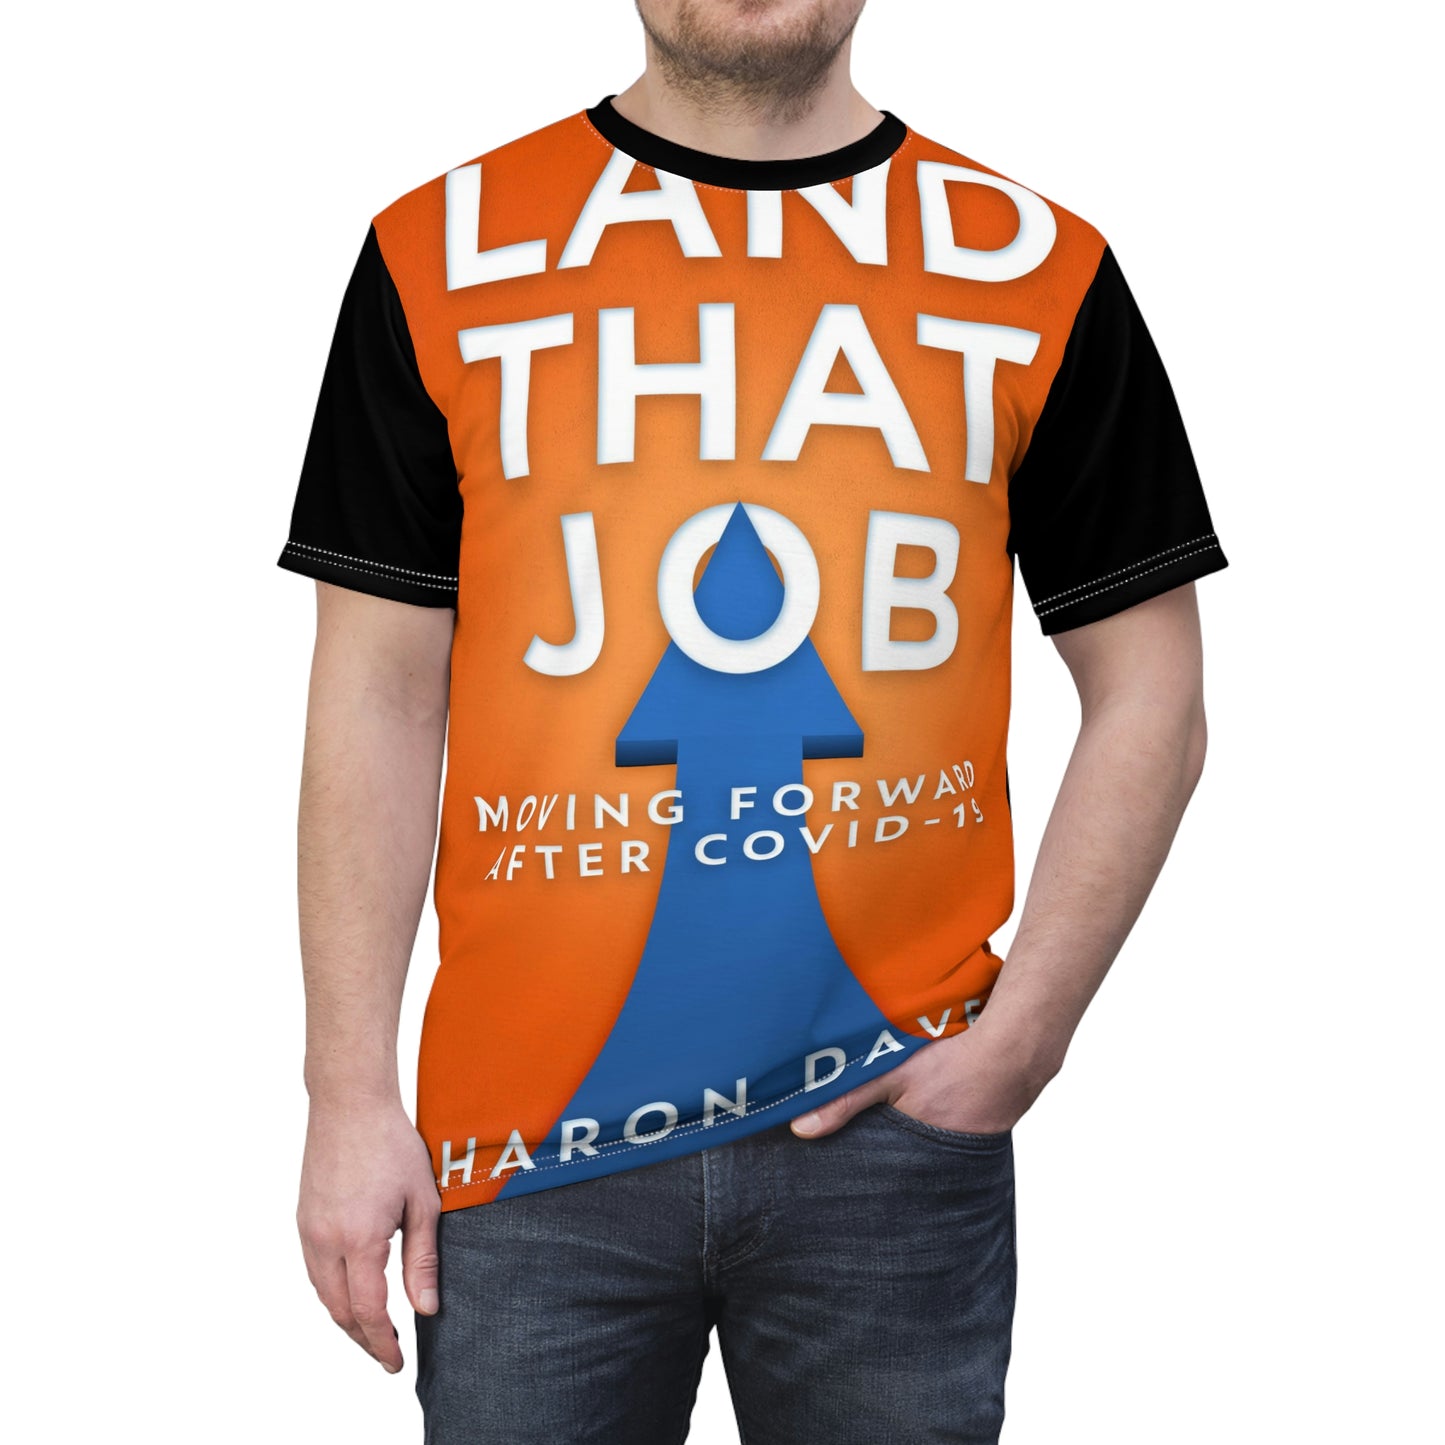 Land That Job - Moving Forward After Covid-19 - Unisex All-Over Print Cut & Sew T-Shirt